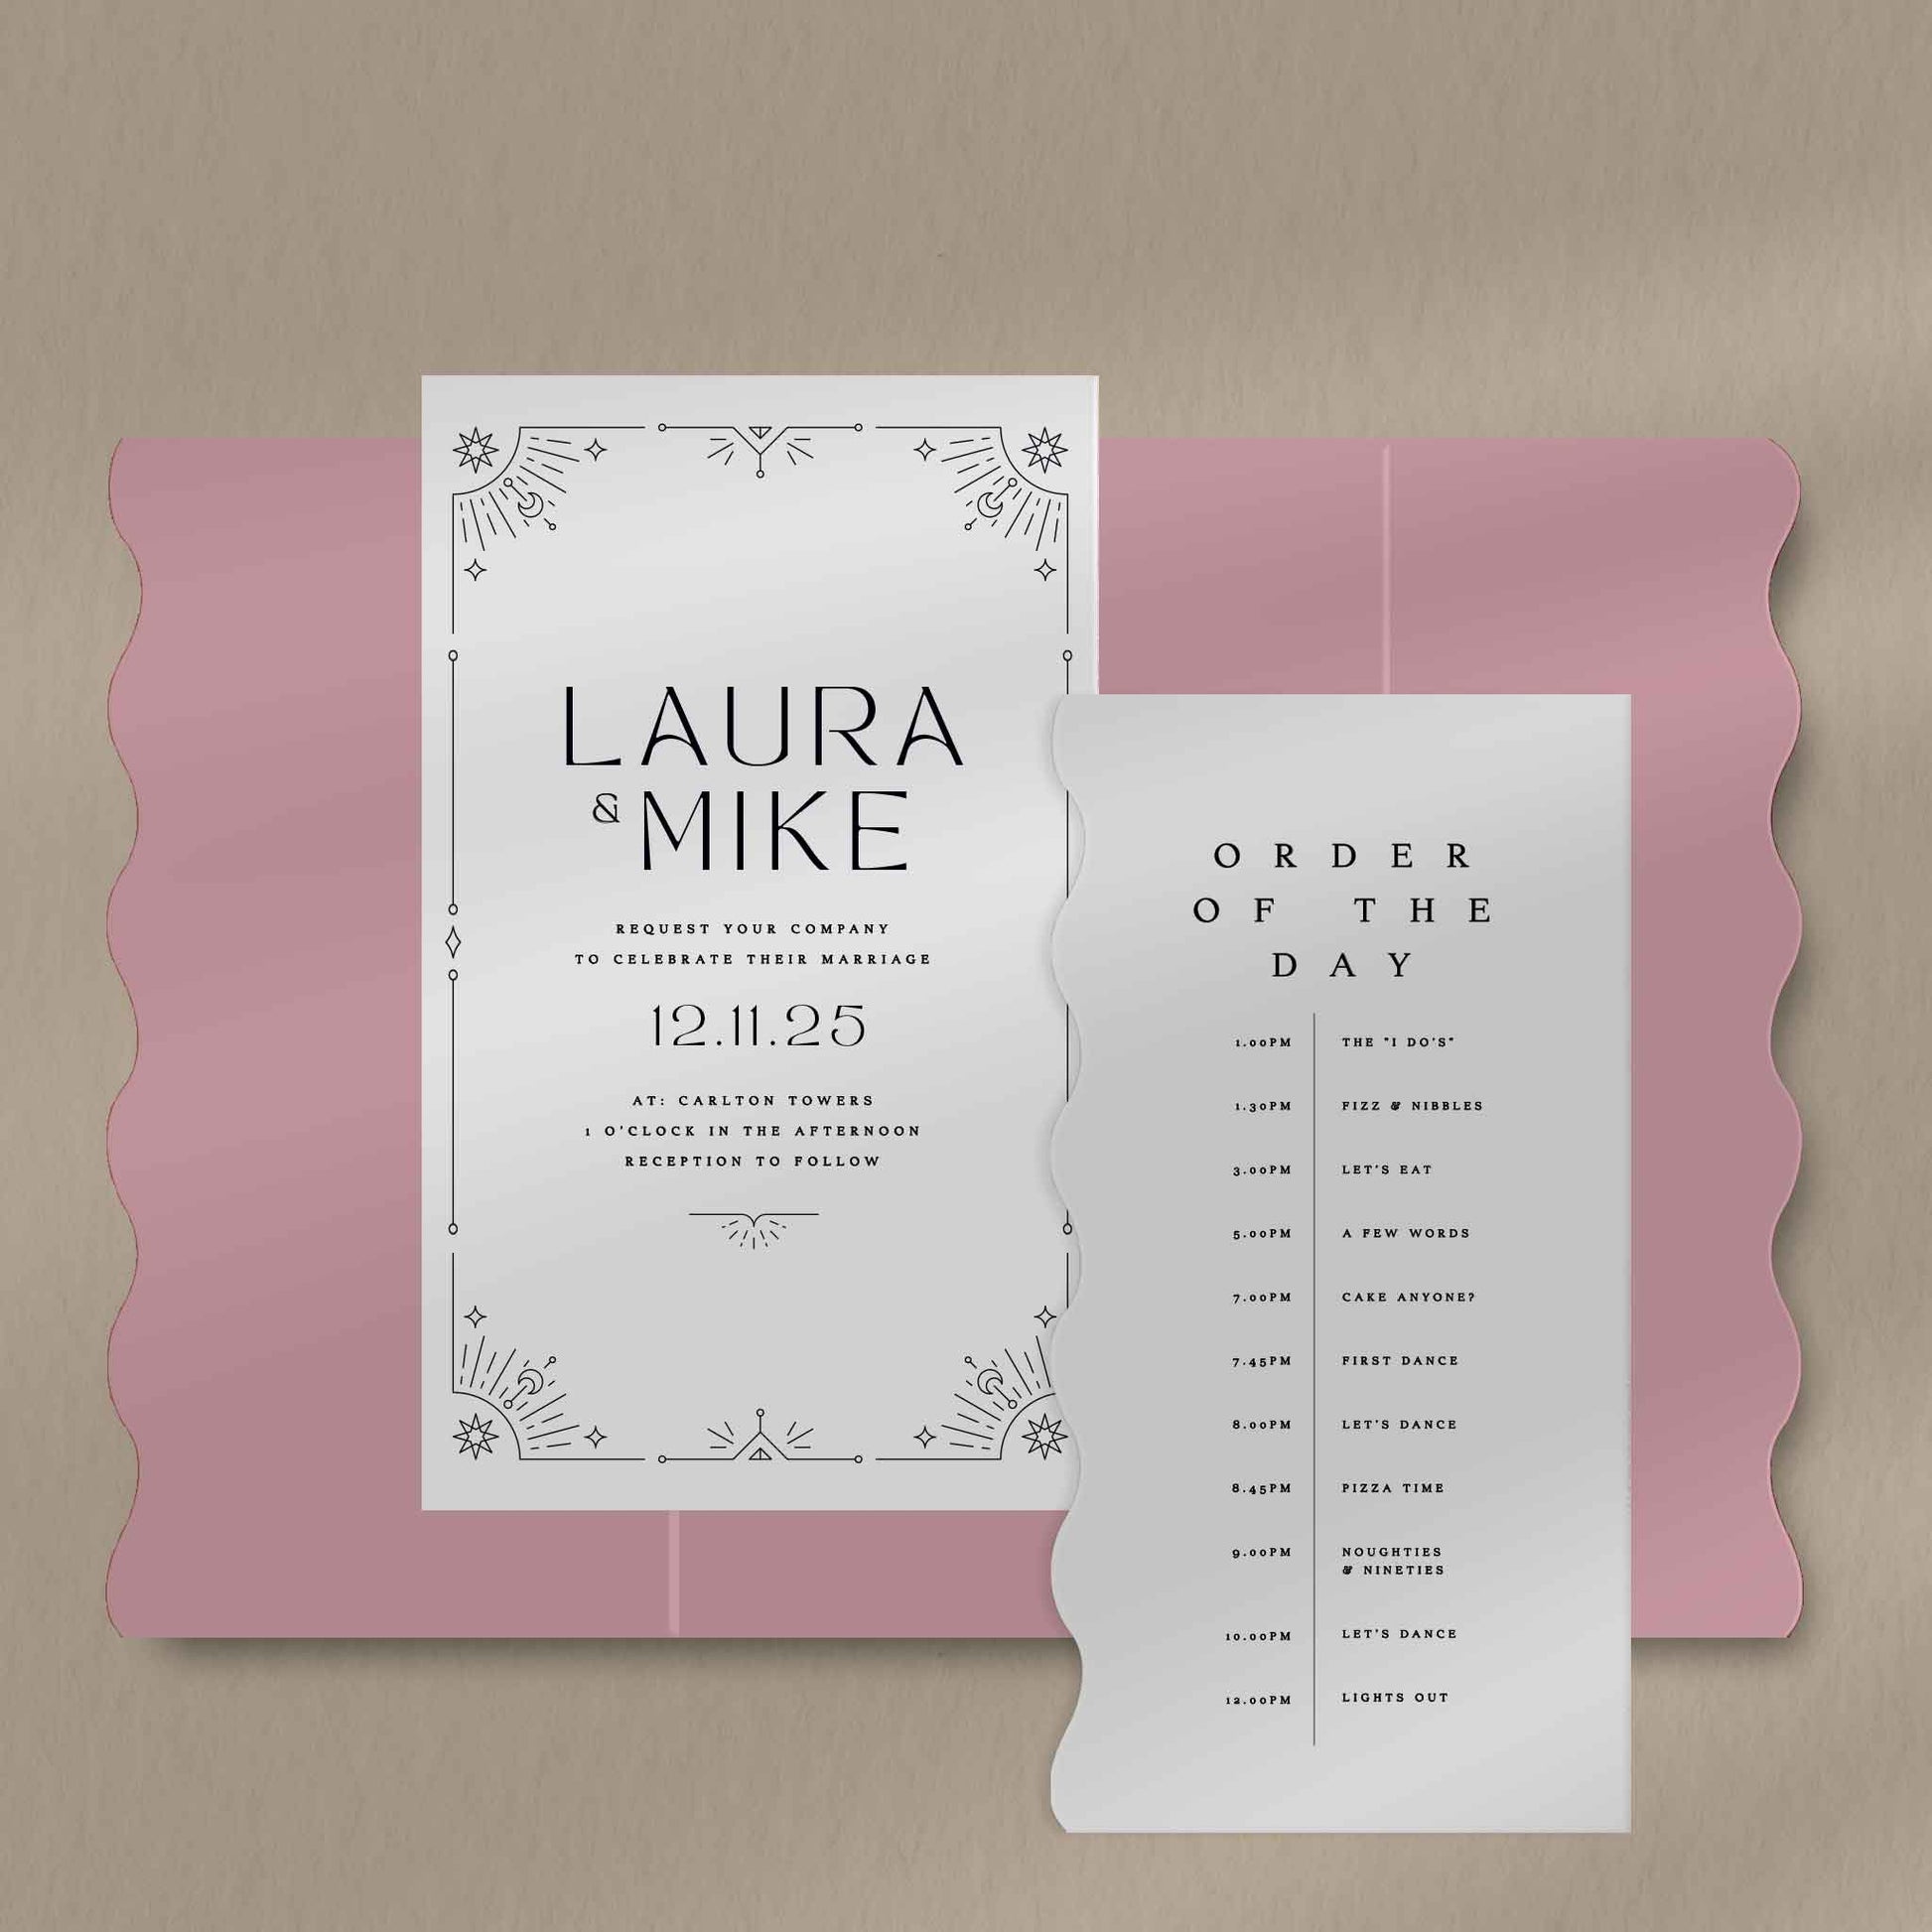 Scallop Envelope Sample  Ivy and Gold Wedding Stationery Laura  